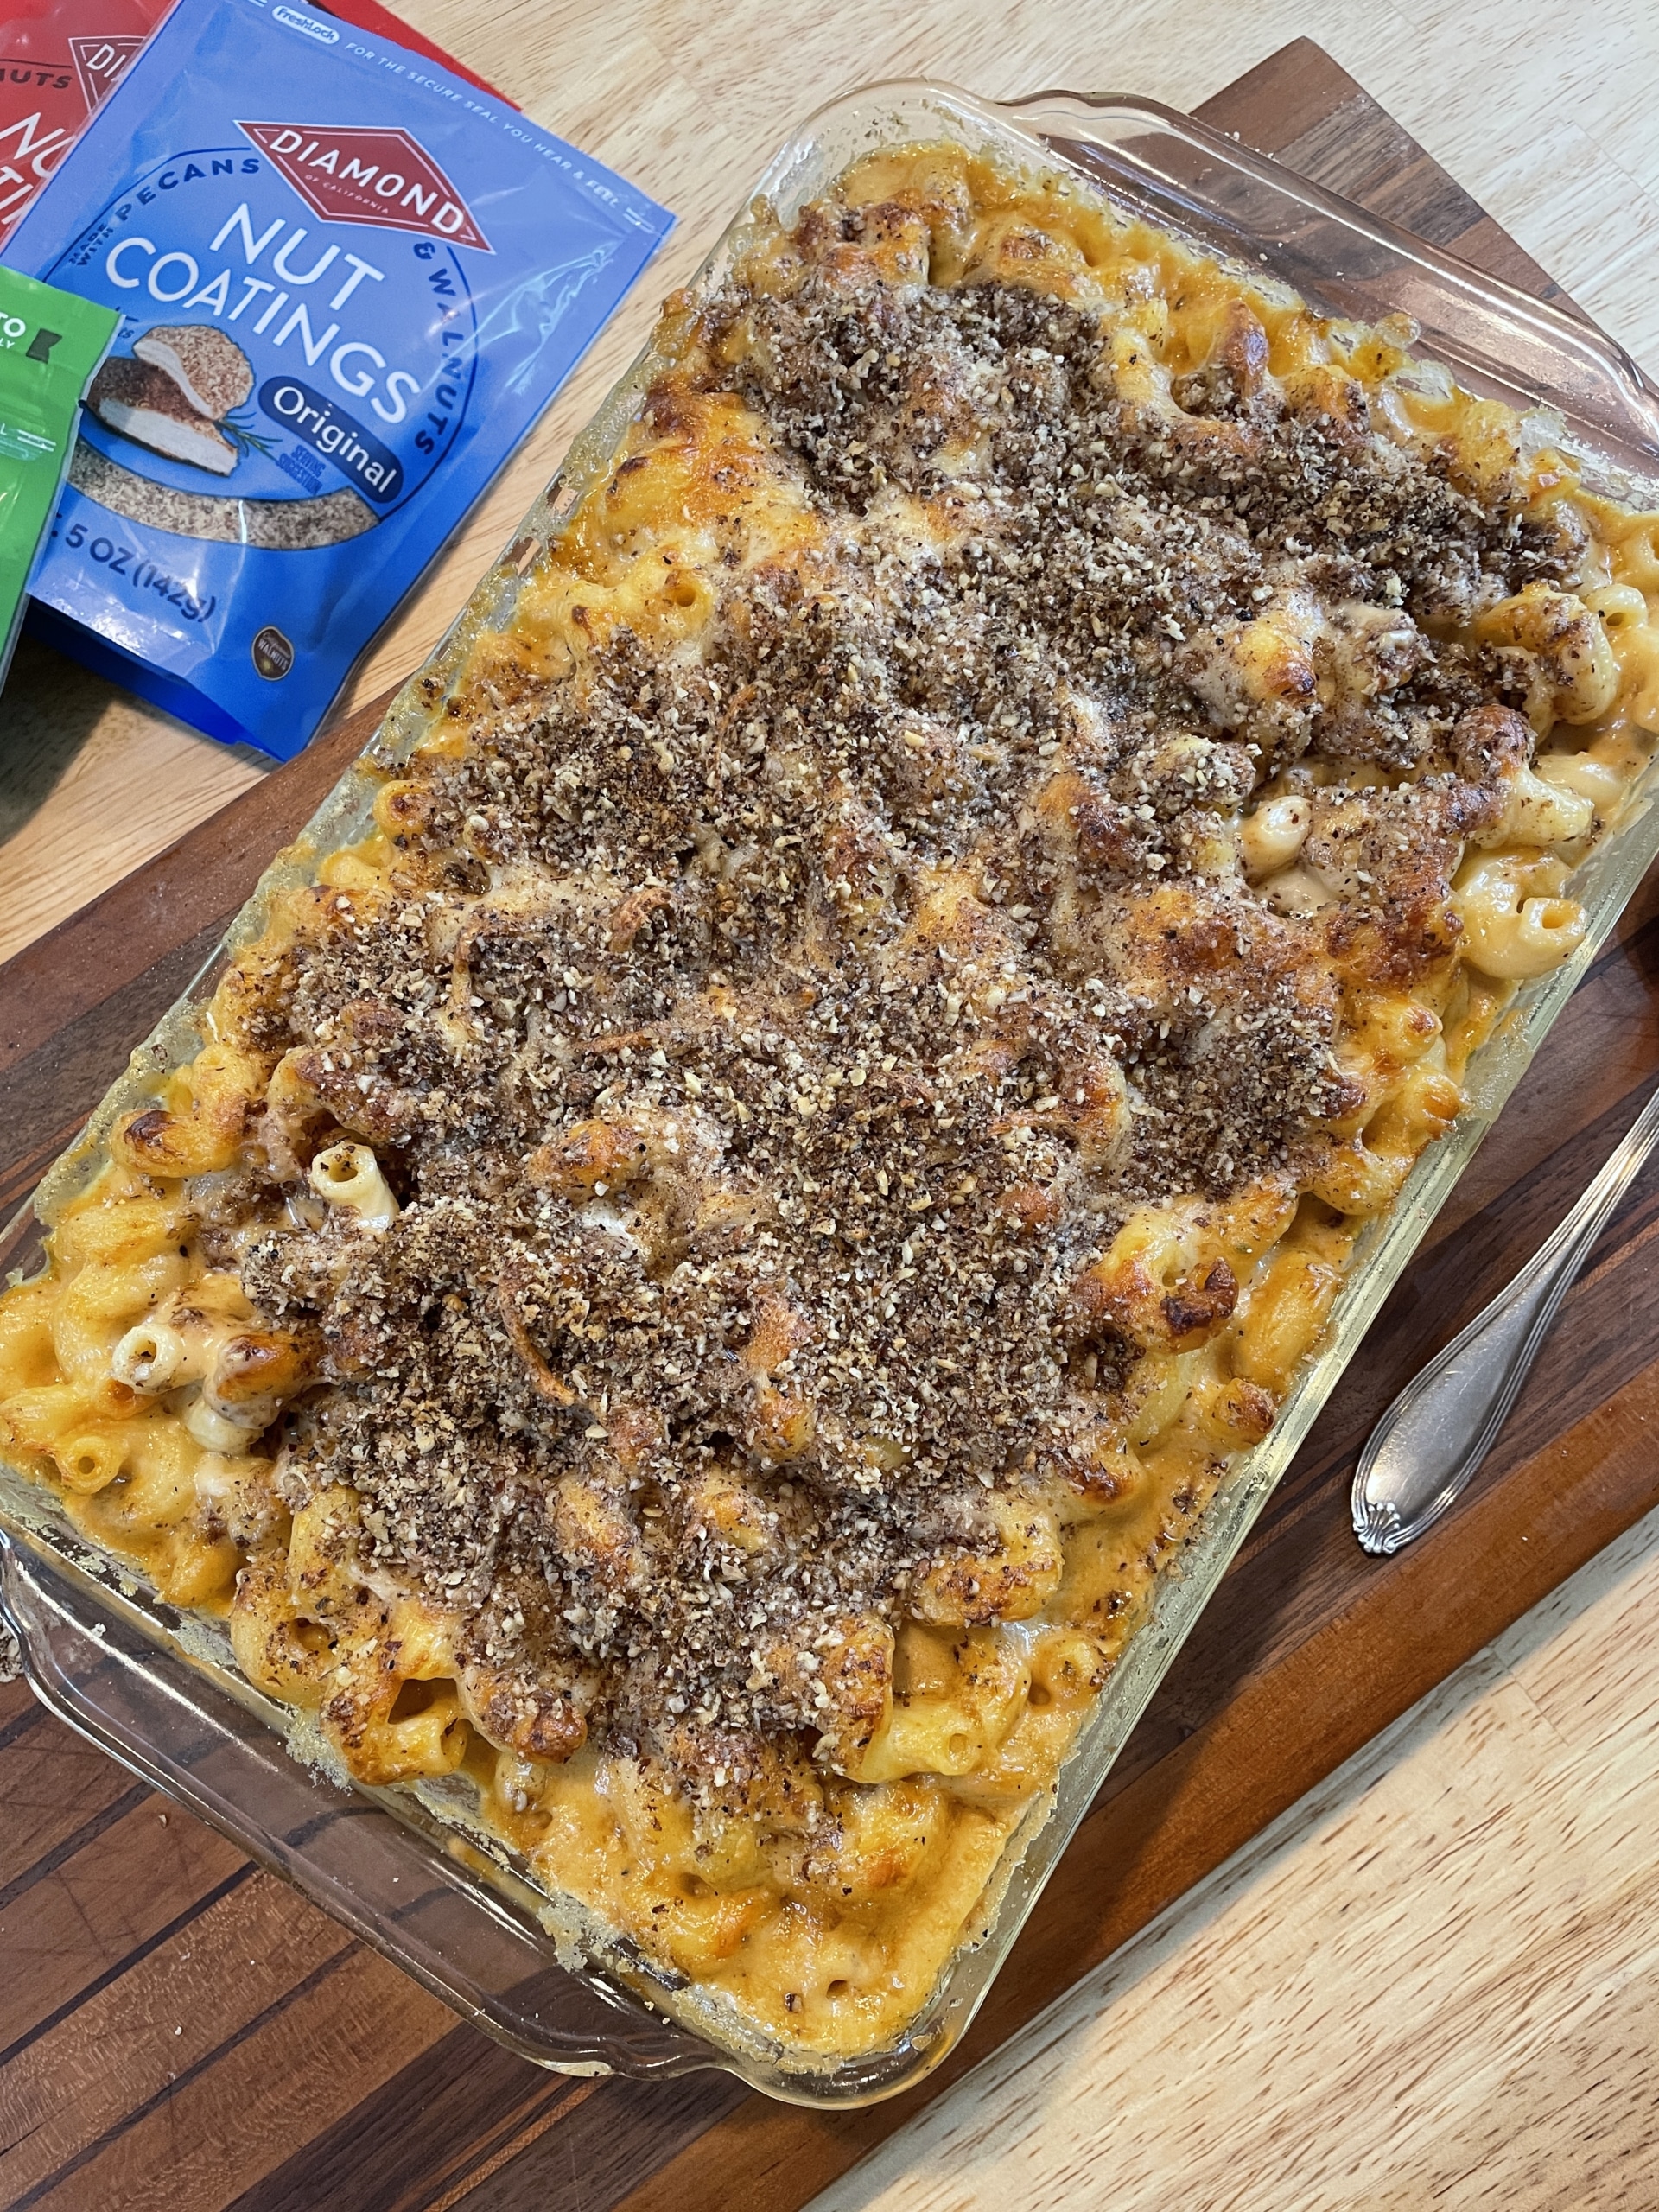 Barbecue Mac and Cheese Casserole next to bags of Diamond nut coatings.